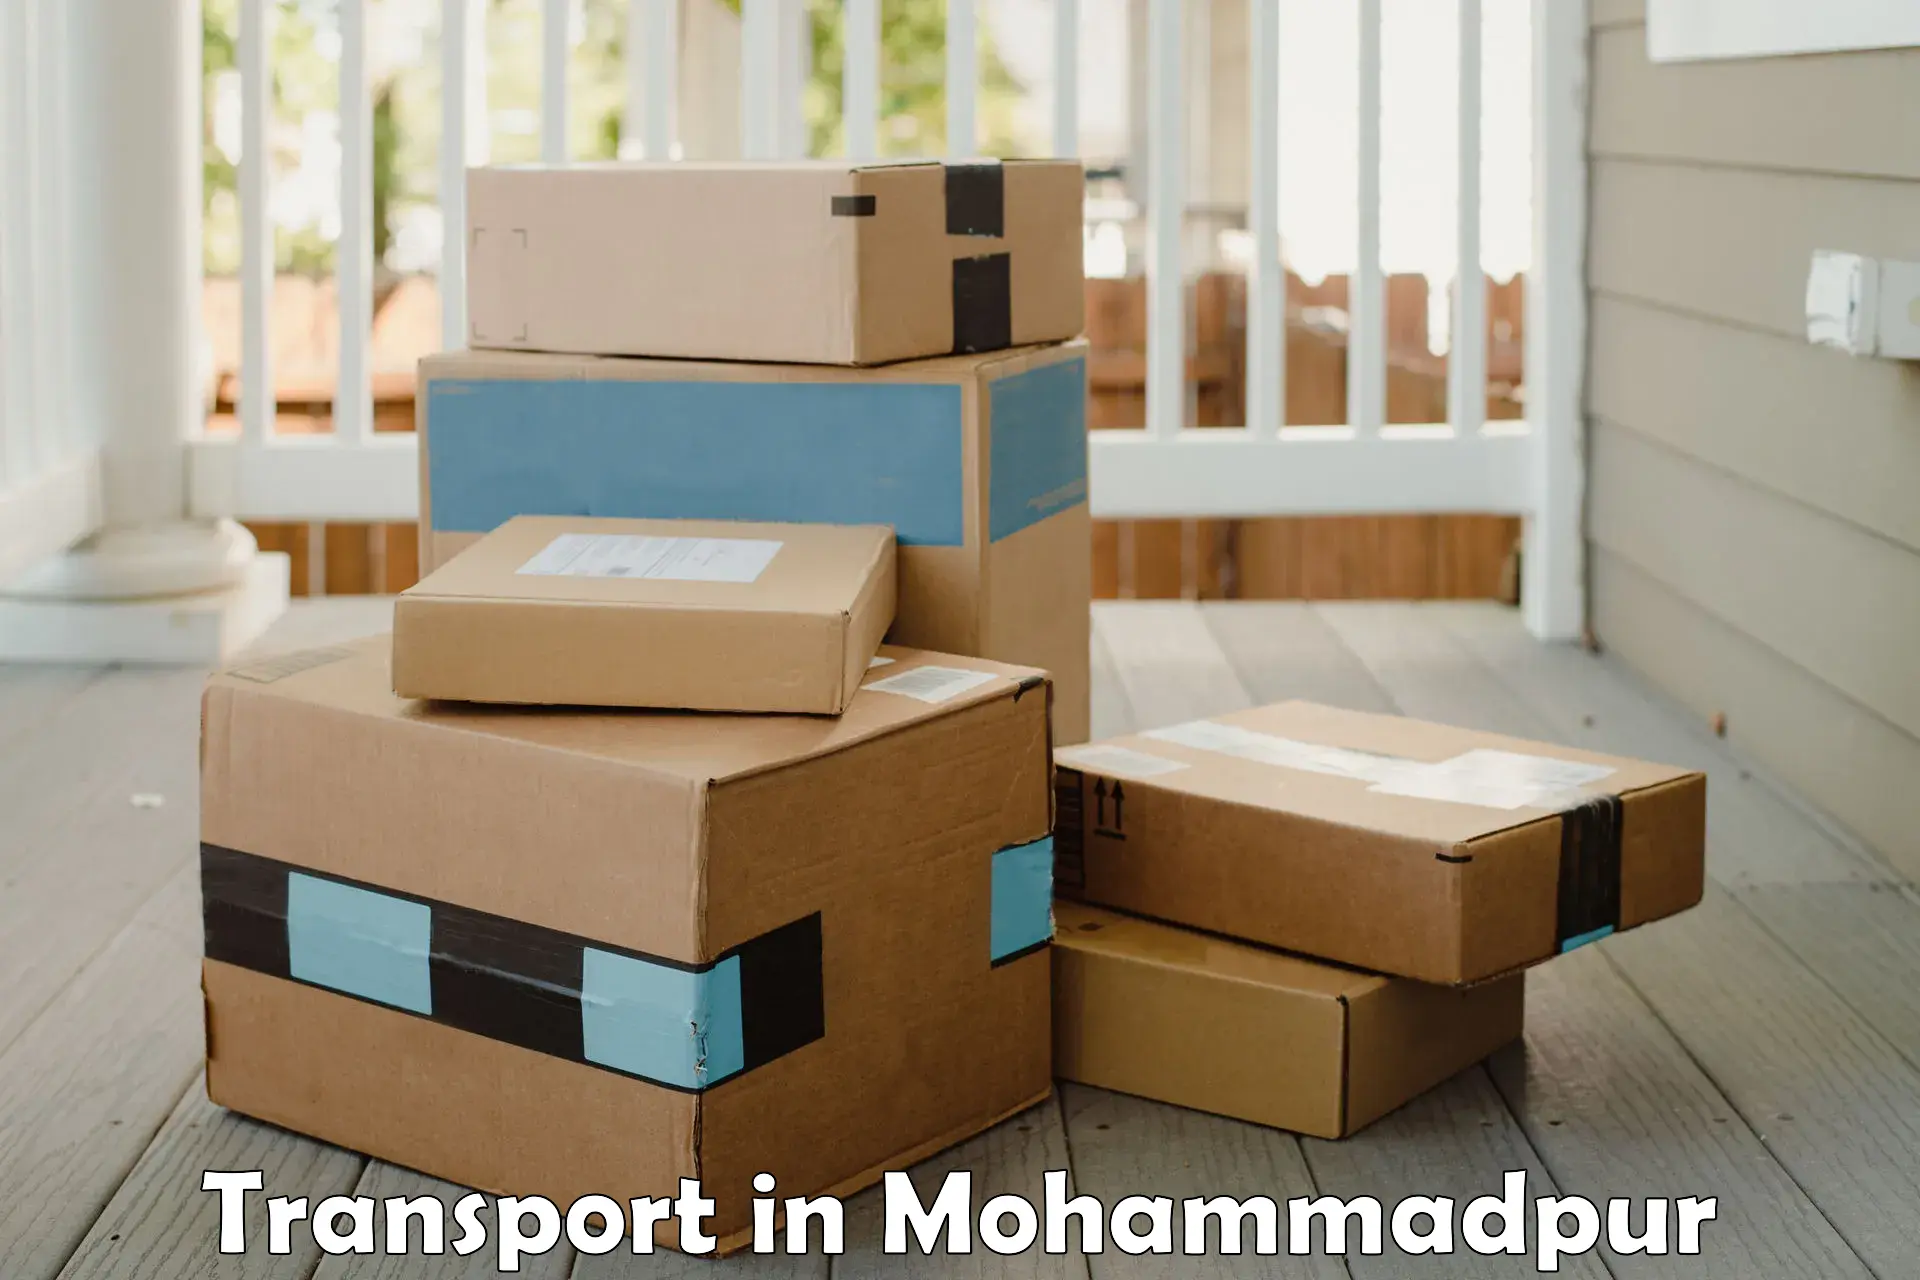 Package delivery services in Mohammadpur